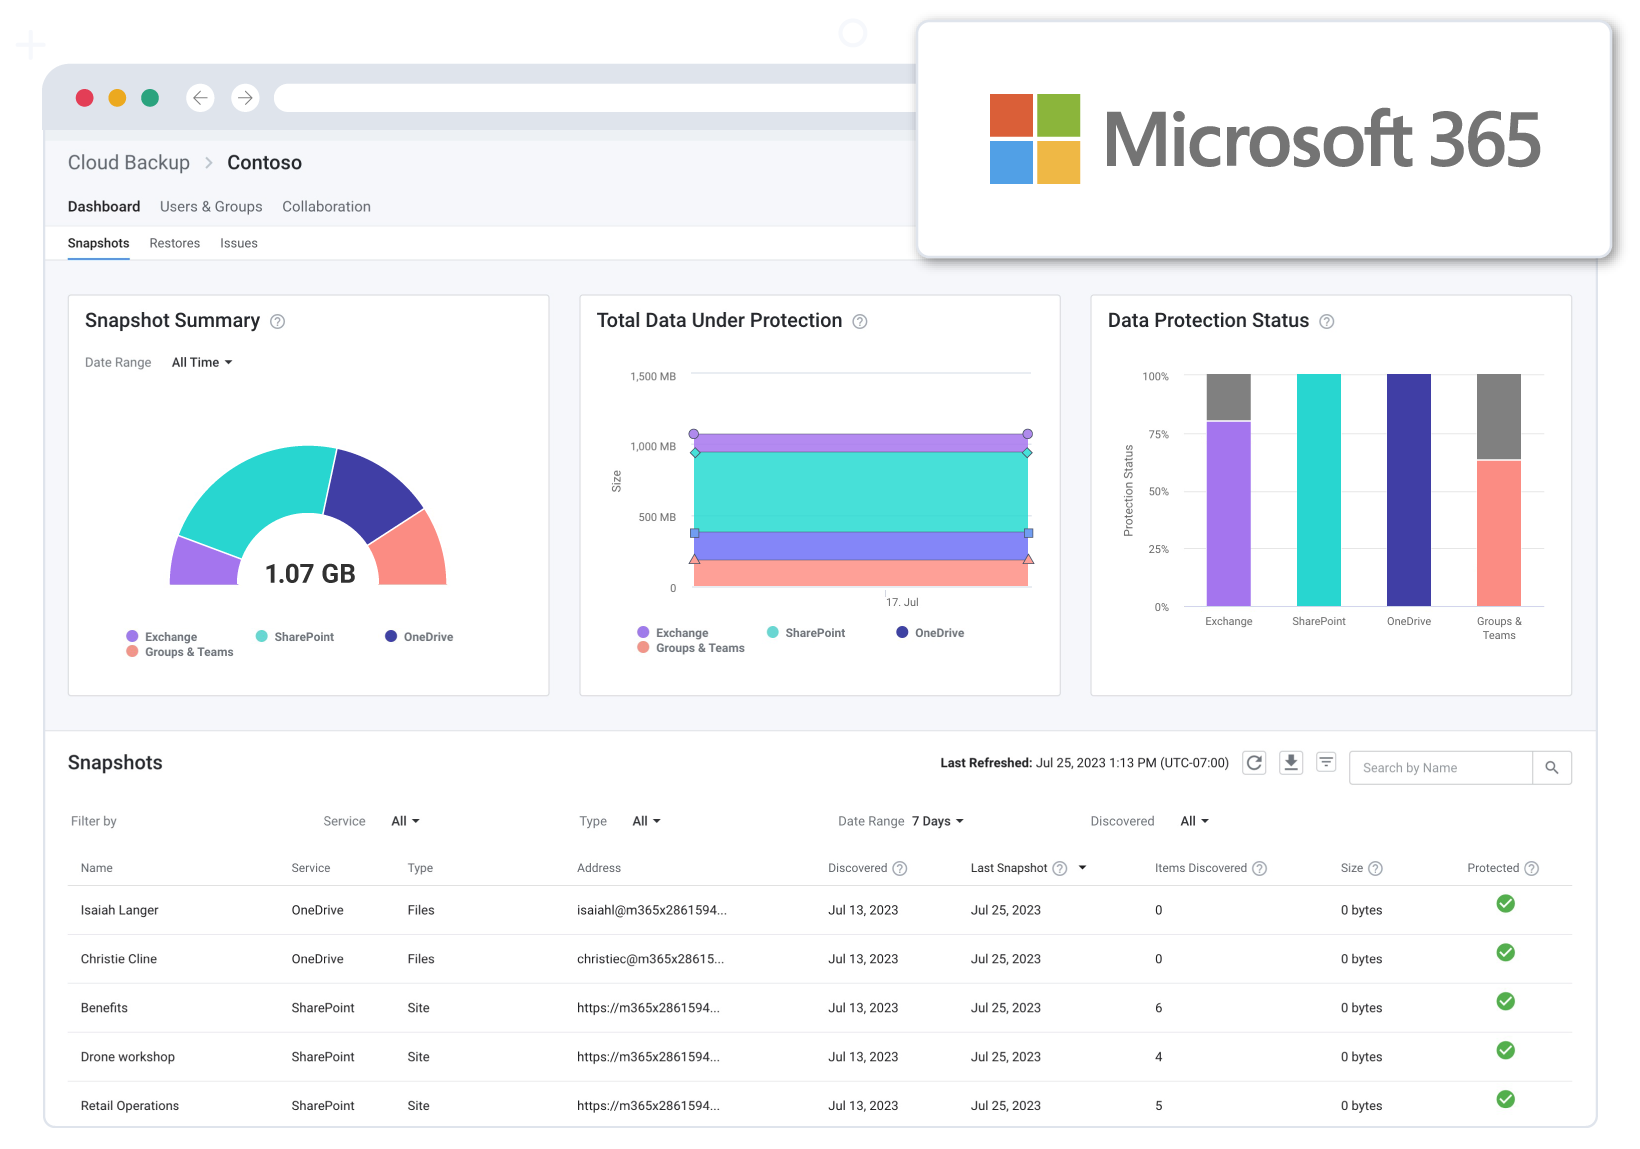 Product screen showing Microsoft 365 logo and graphs of snapshot summary, total data under protection, and status